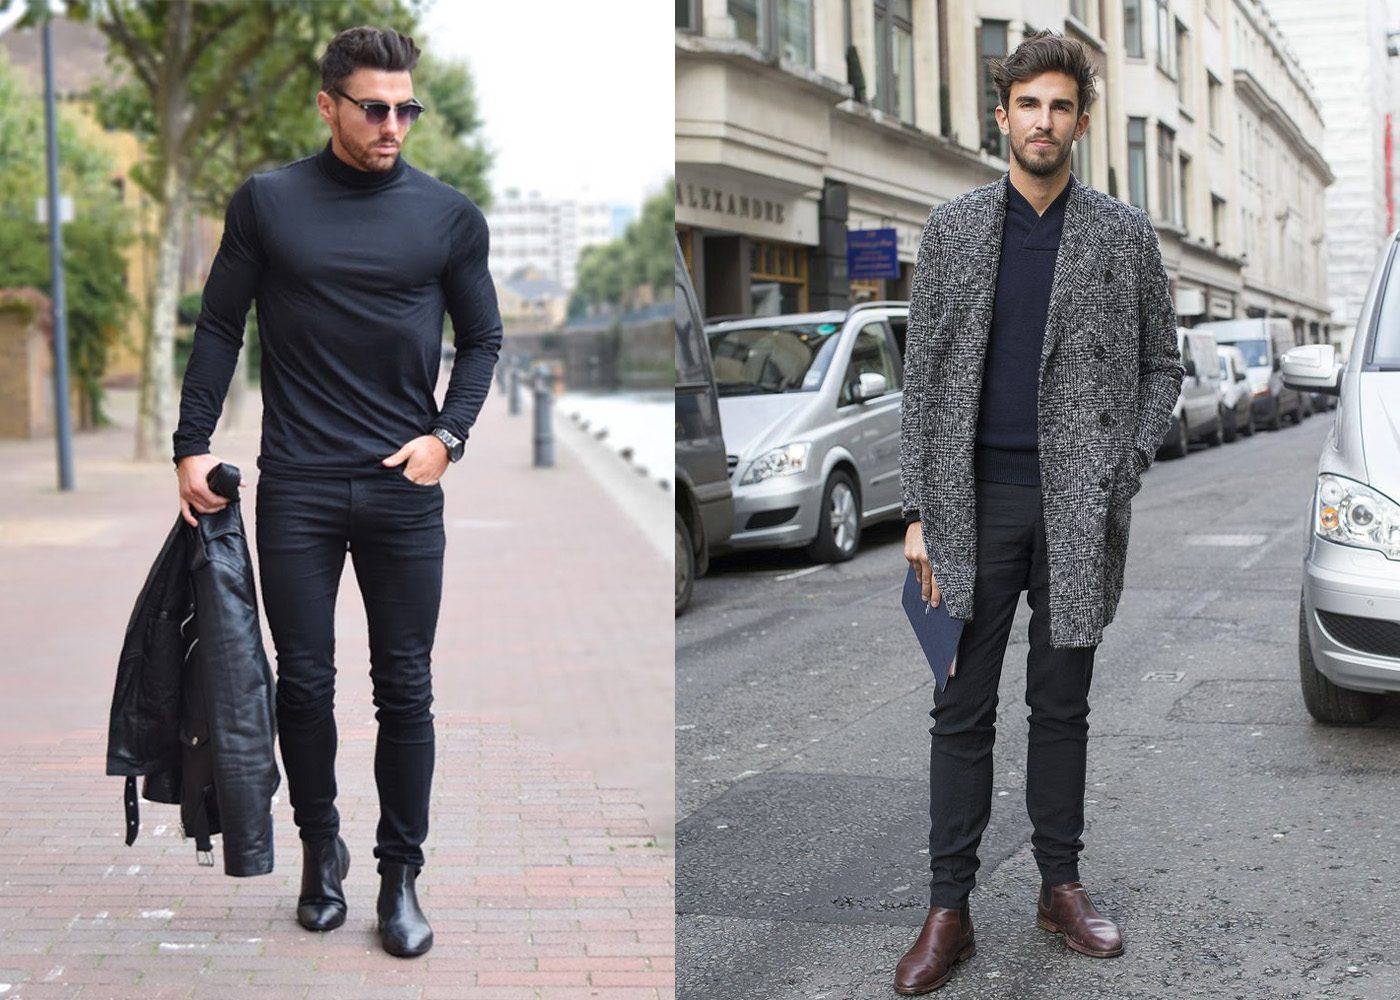 Chelsea Boots; Pointed vs Rounded